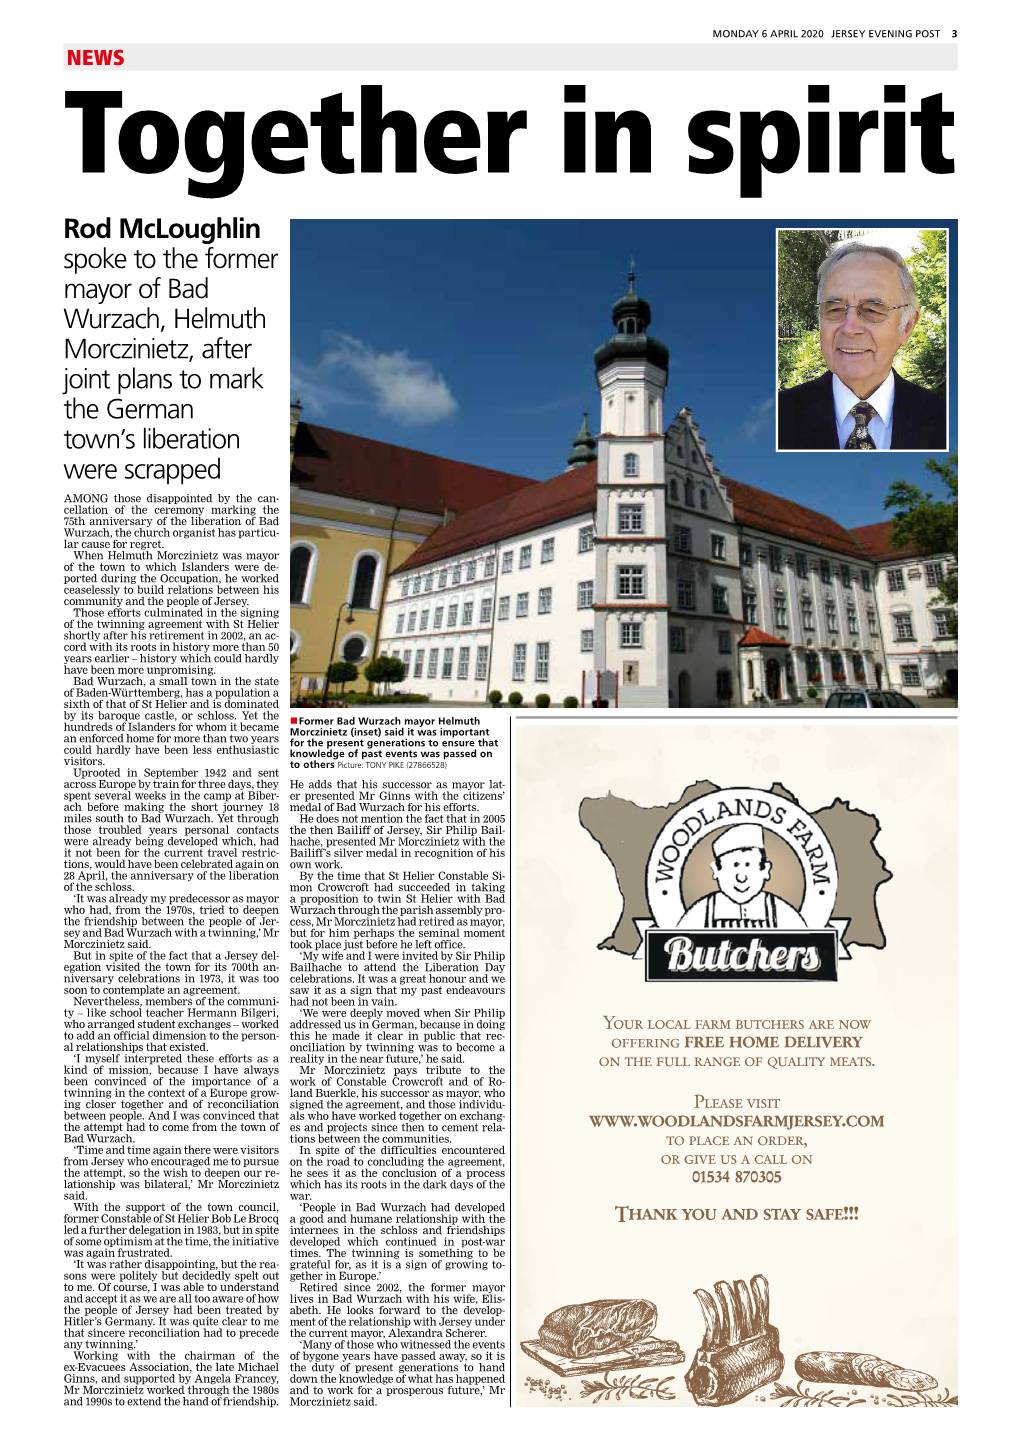 Rod Mcloughlin Spoke to the Former Mayor of Bad Wurzach, Helmuth